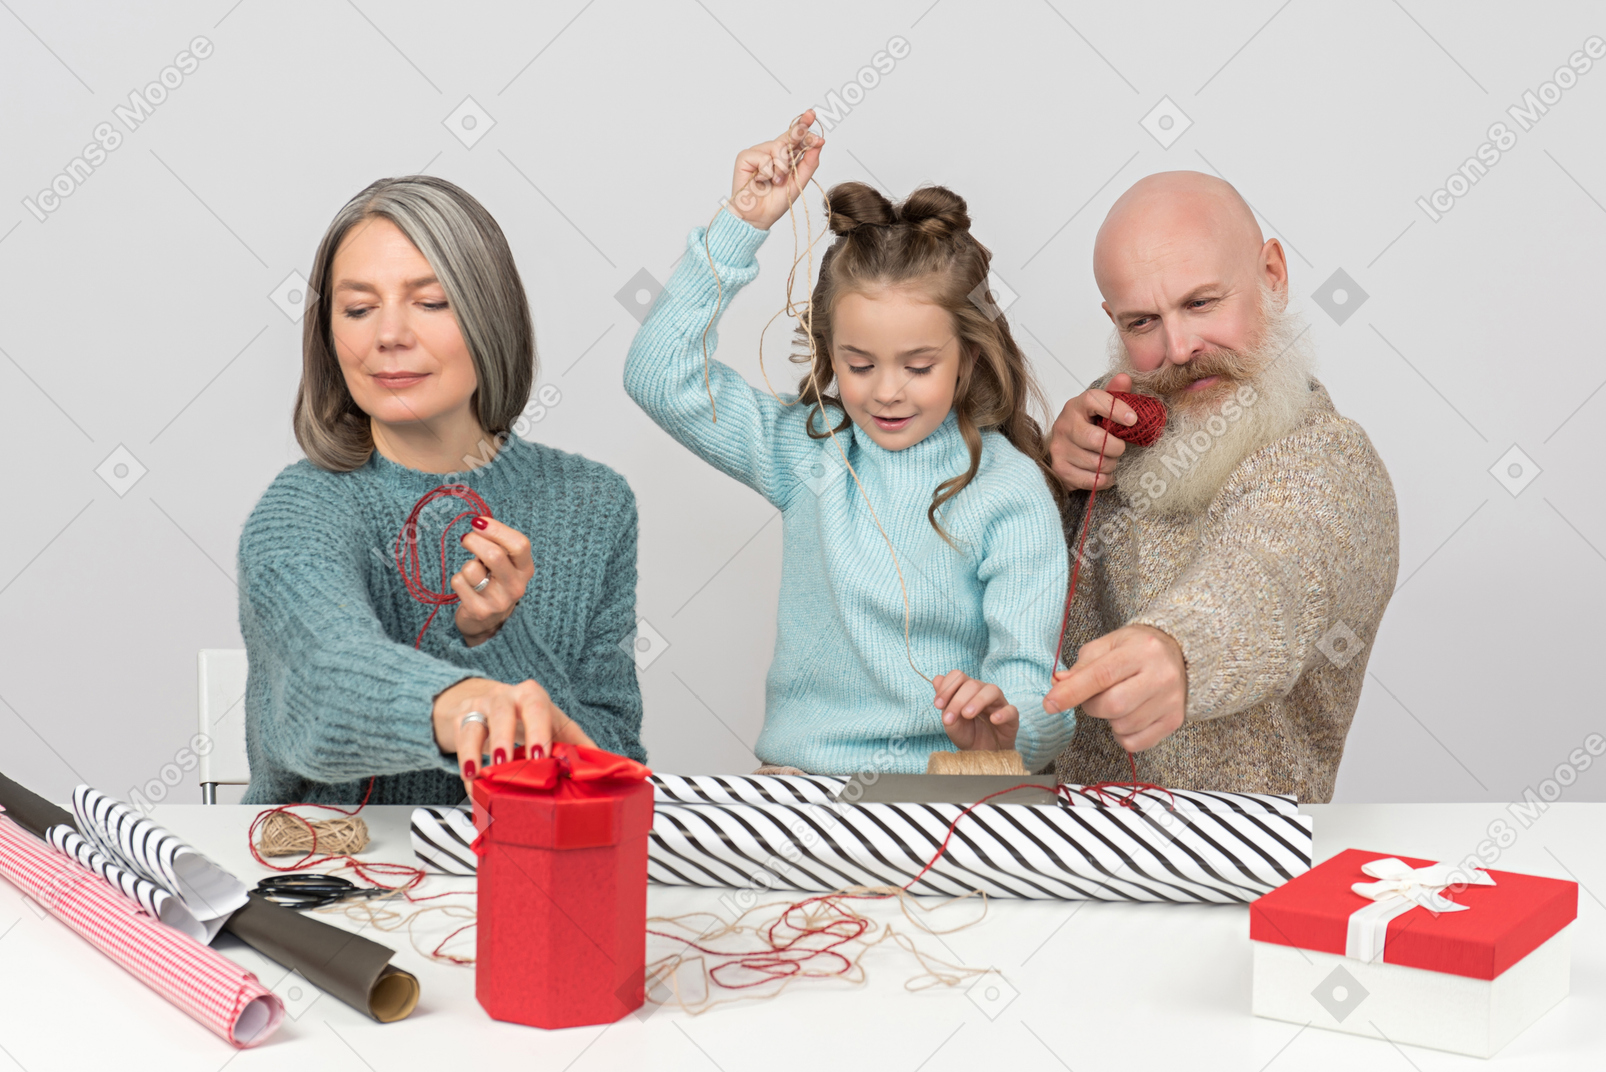 Grandparents and granddaughter wrapping gifts